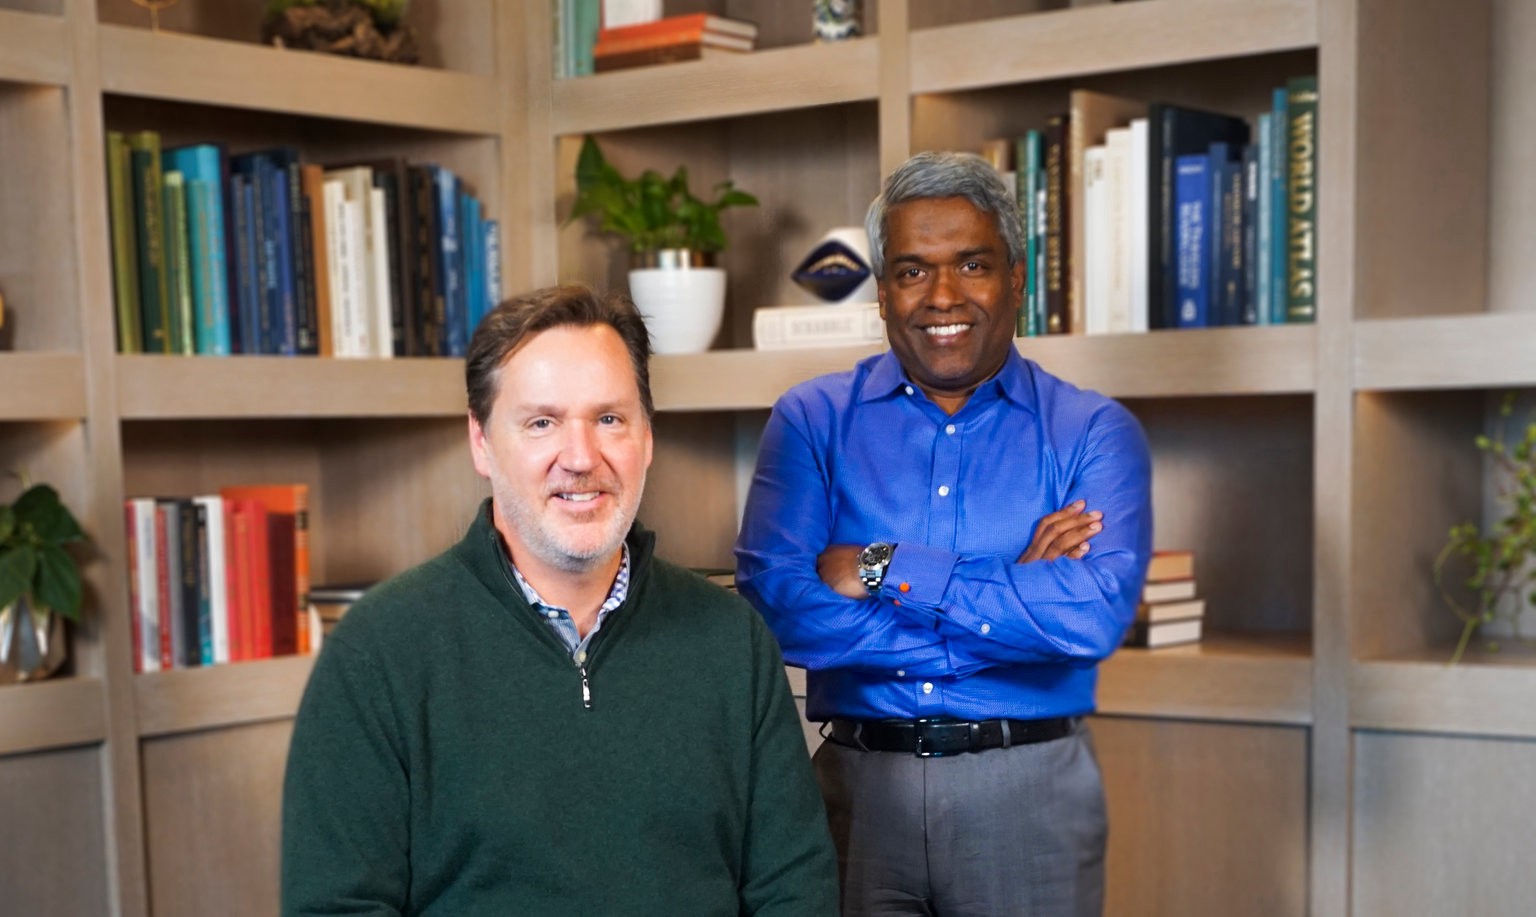 From the left: Frank Bien, CEO of Looker and Thomas Kurian, CEO of GCP.